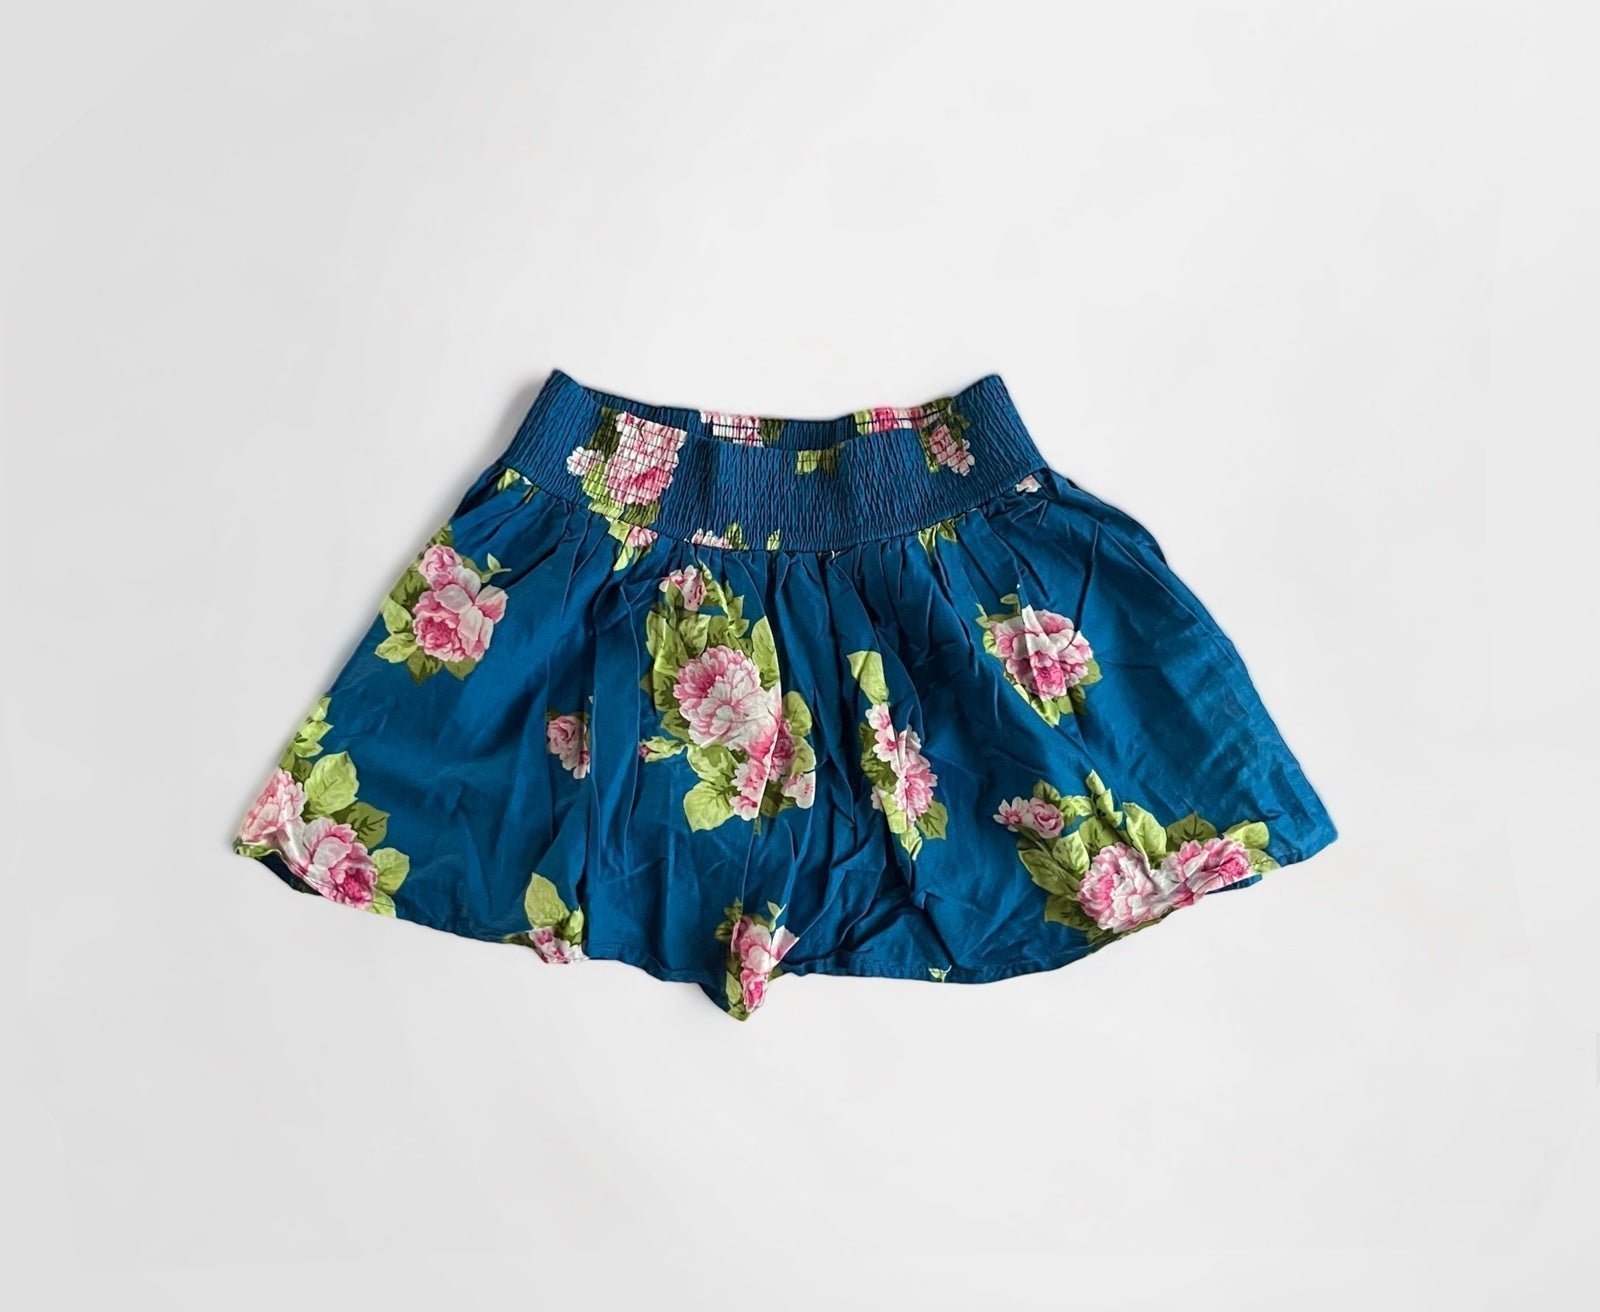 good price Hollister Co. Floral Skirt (Blue/Pink/Green), Extra Small KgnrYH6ay Counter Genuine 